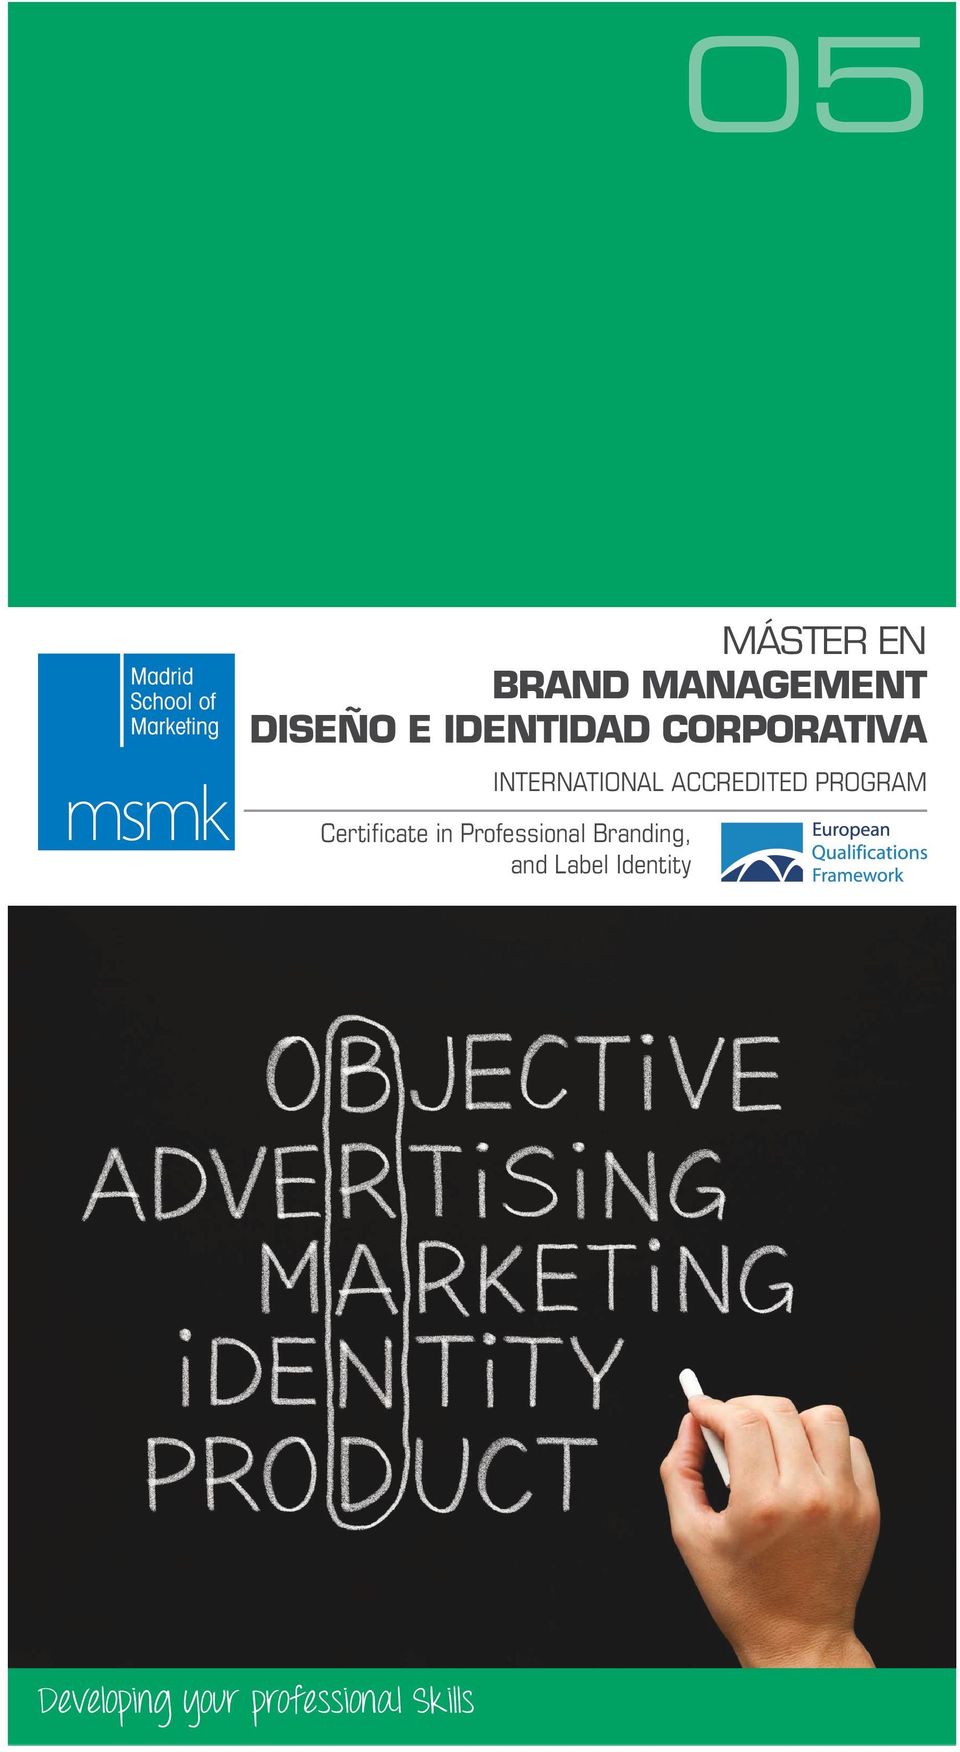 Certificate in Professional Branding, and